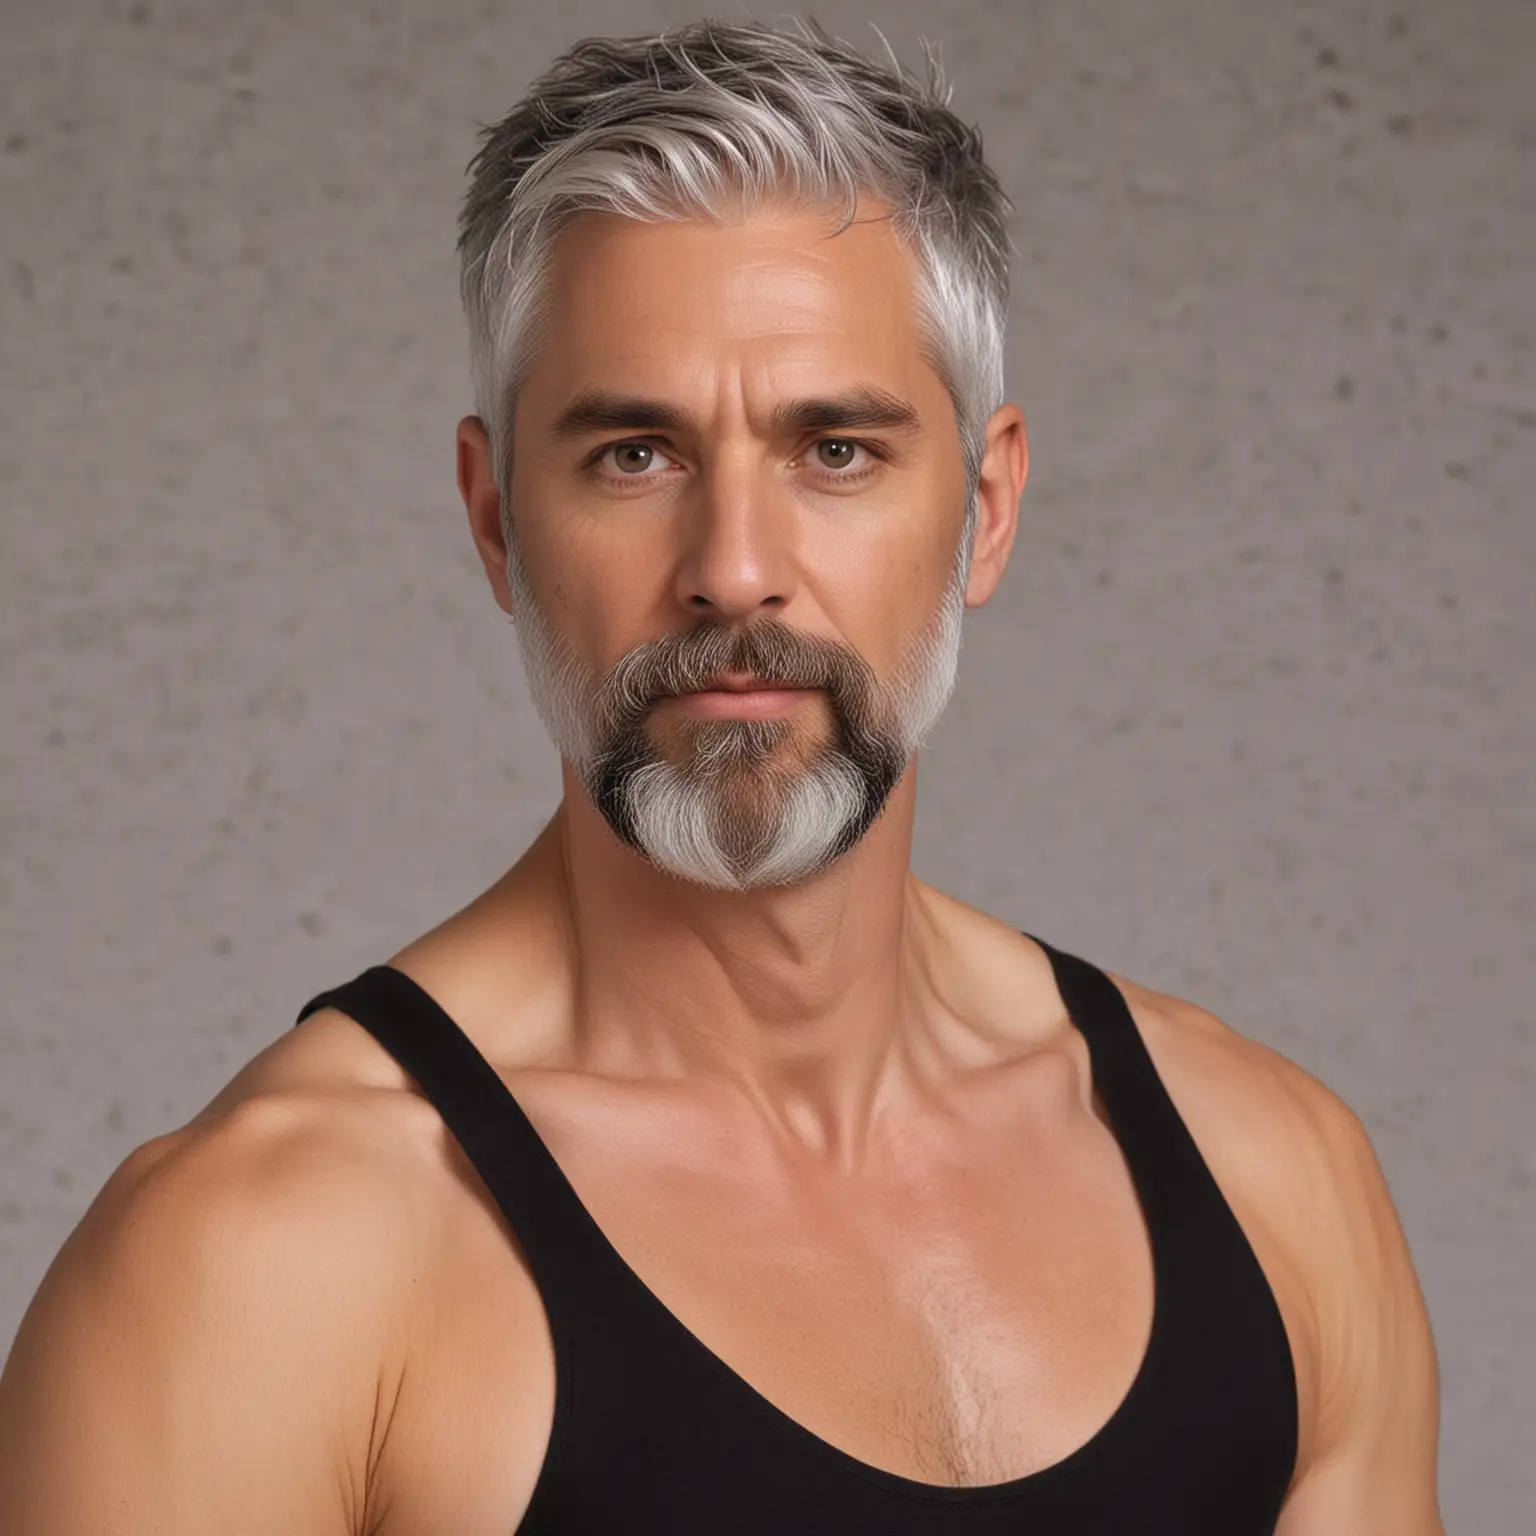 a 40 year old man in a black leotard he has silver hair and a beard